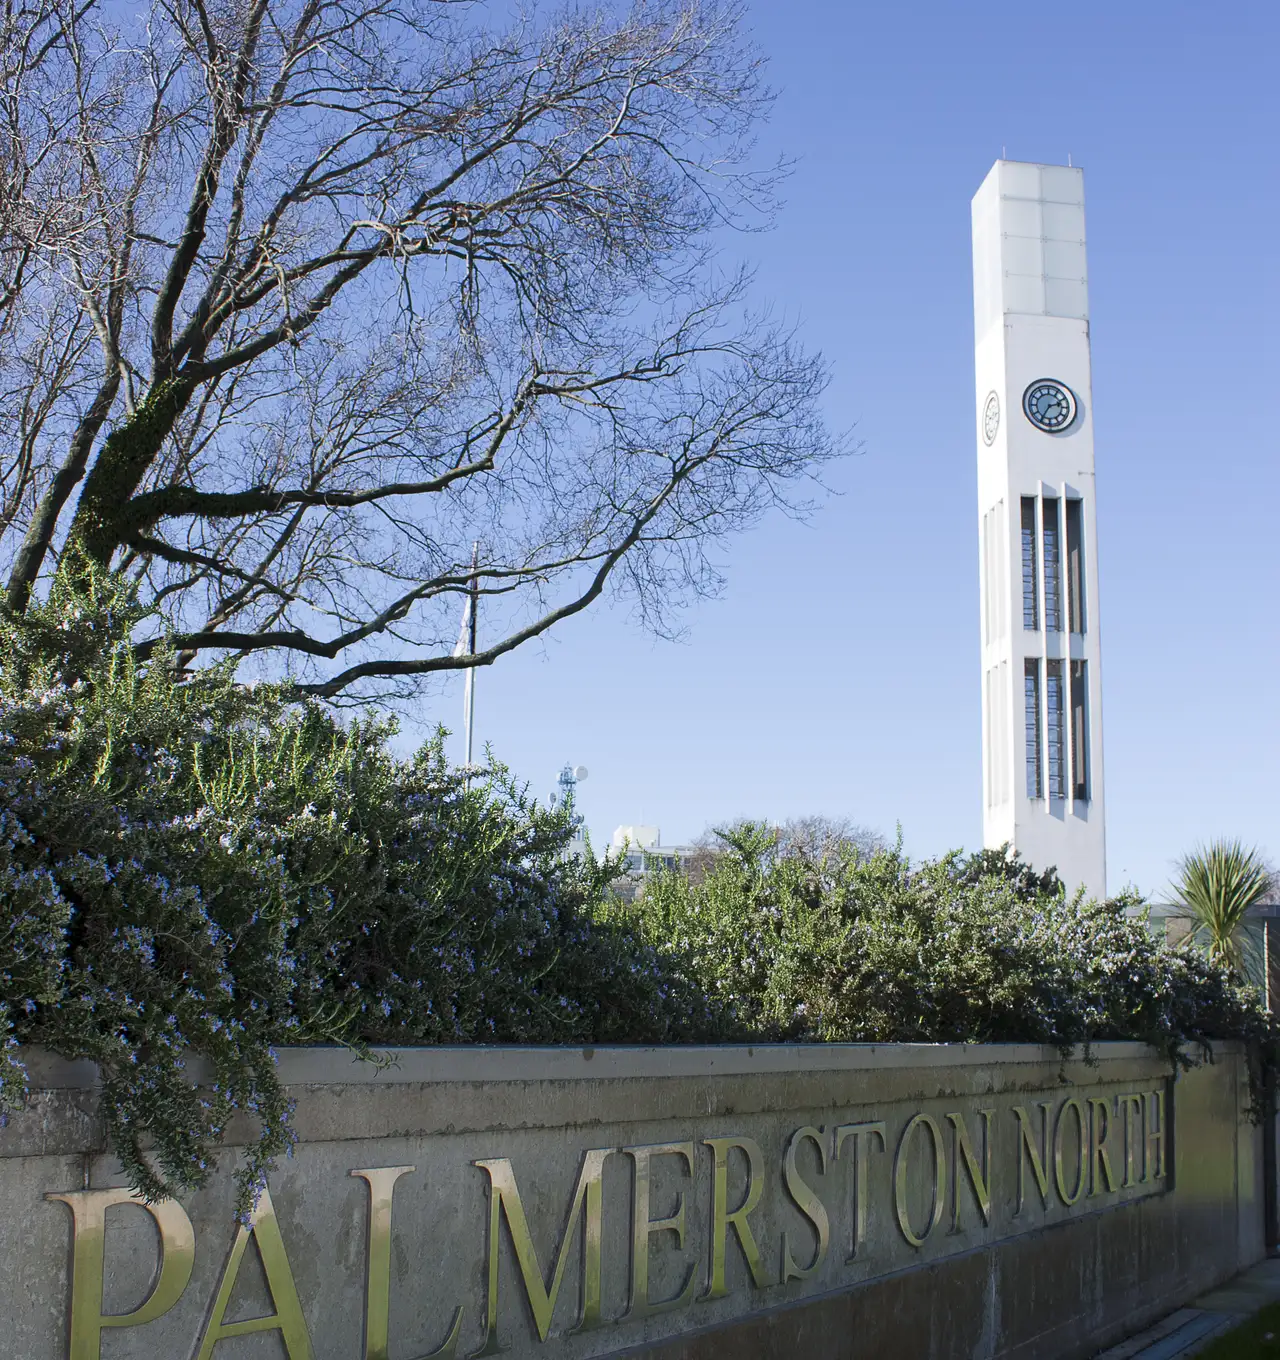 The Hopwood clock tower in Palmerston North